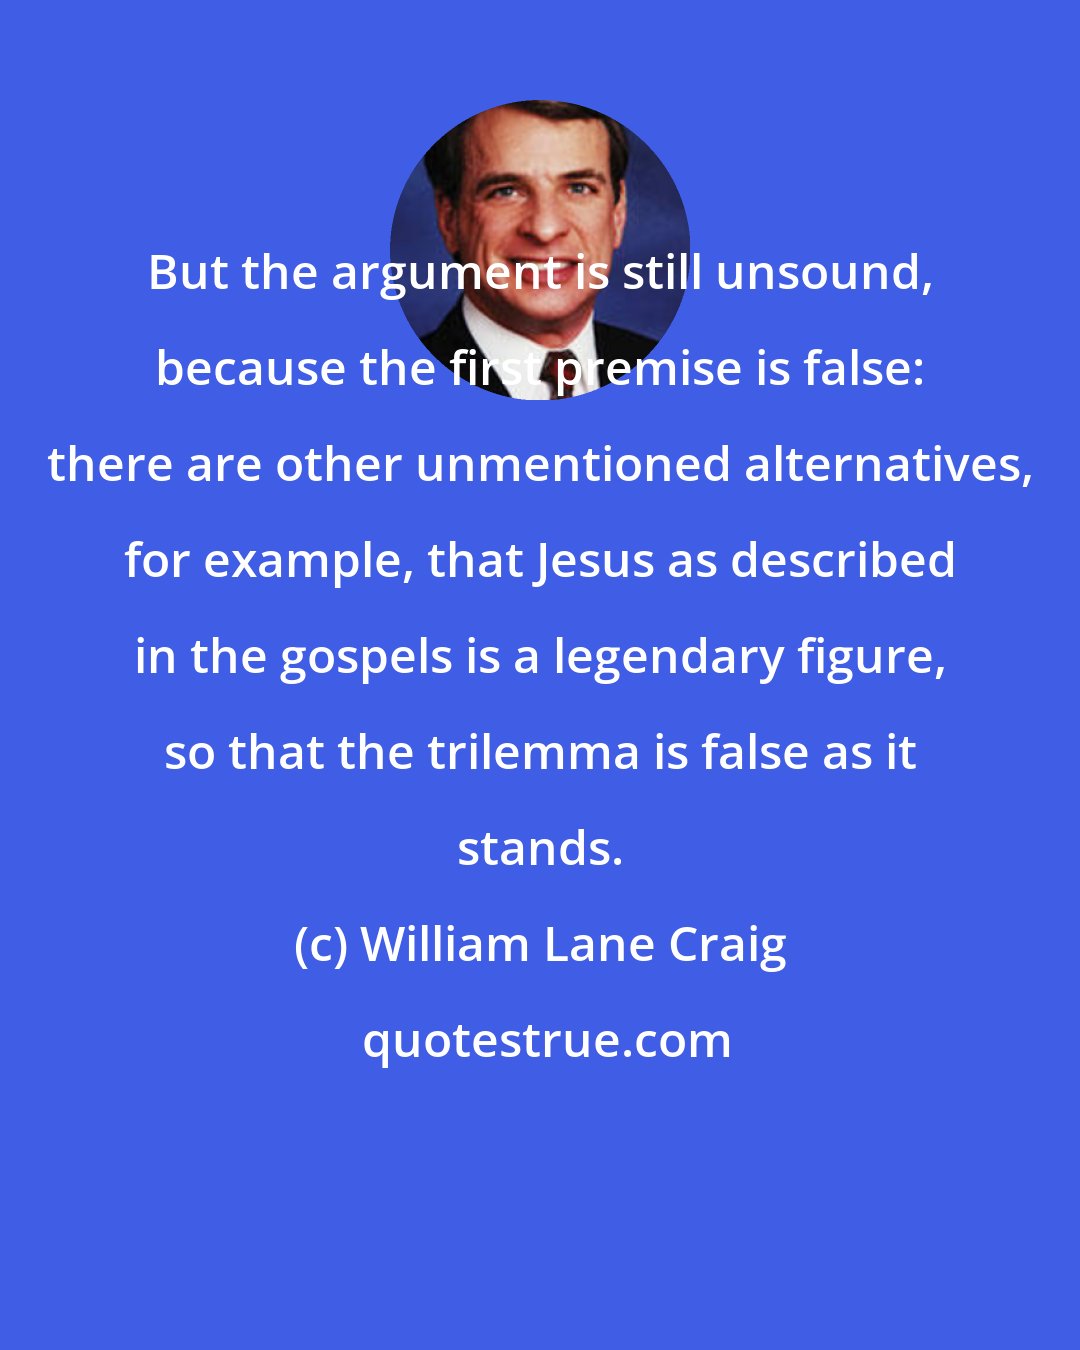 William Lane Craig: But the argument is still unsound, because the first premise is false: there are other unmentioned alternatives, for example, that Jesus as described in the gospels is a legendary figure, so that the trilemma is false as it stands.